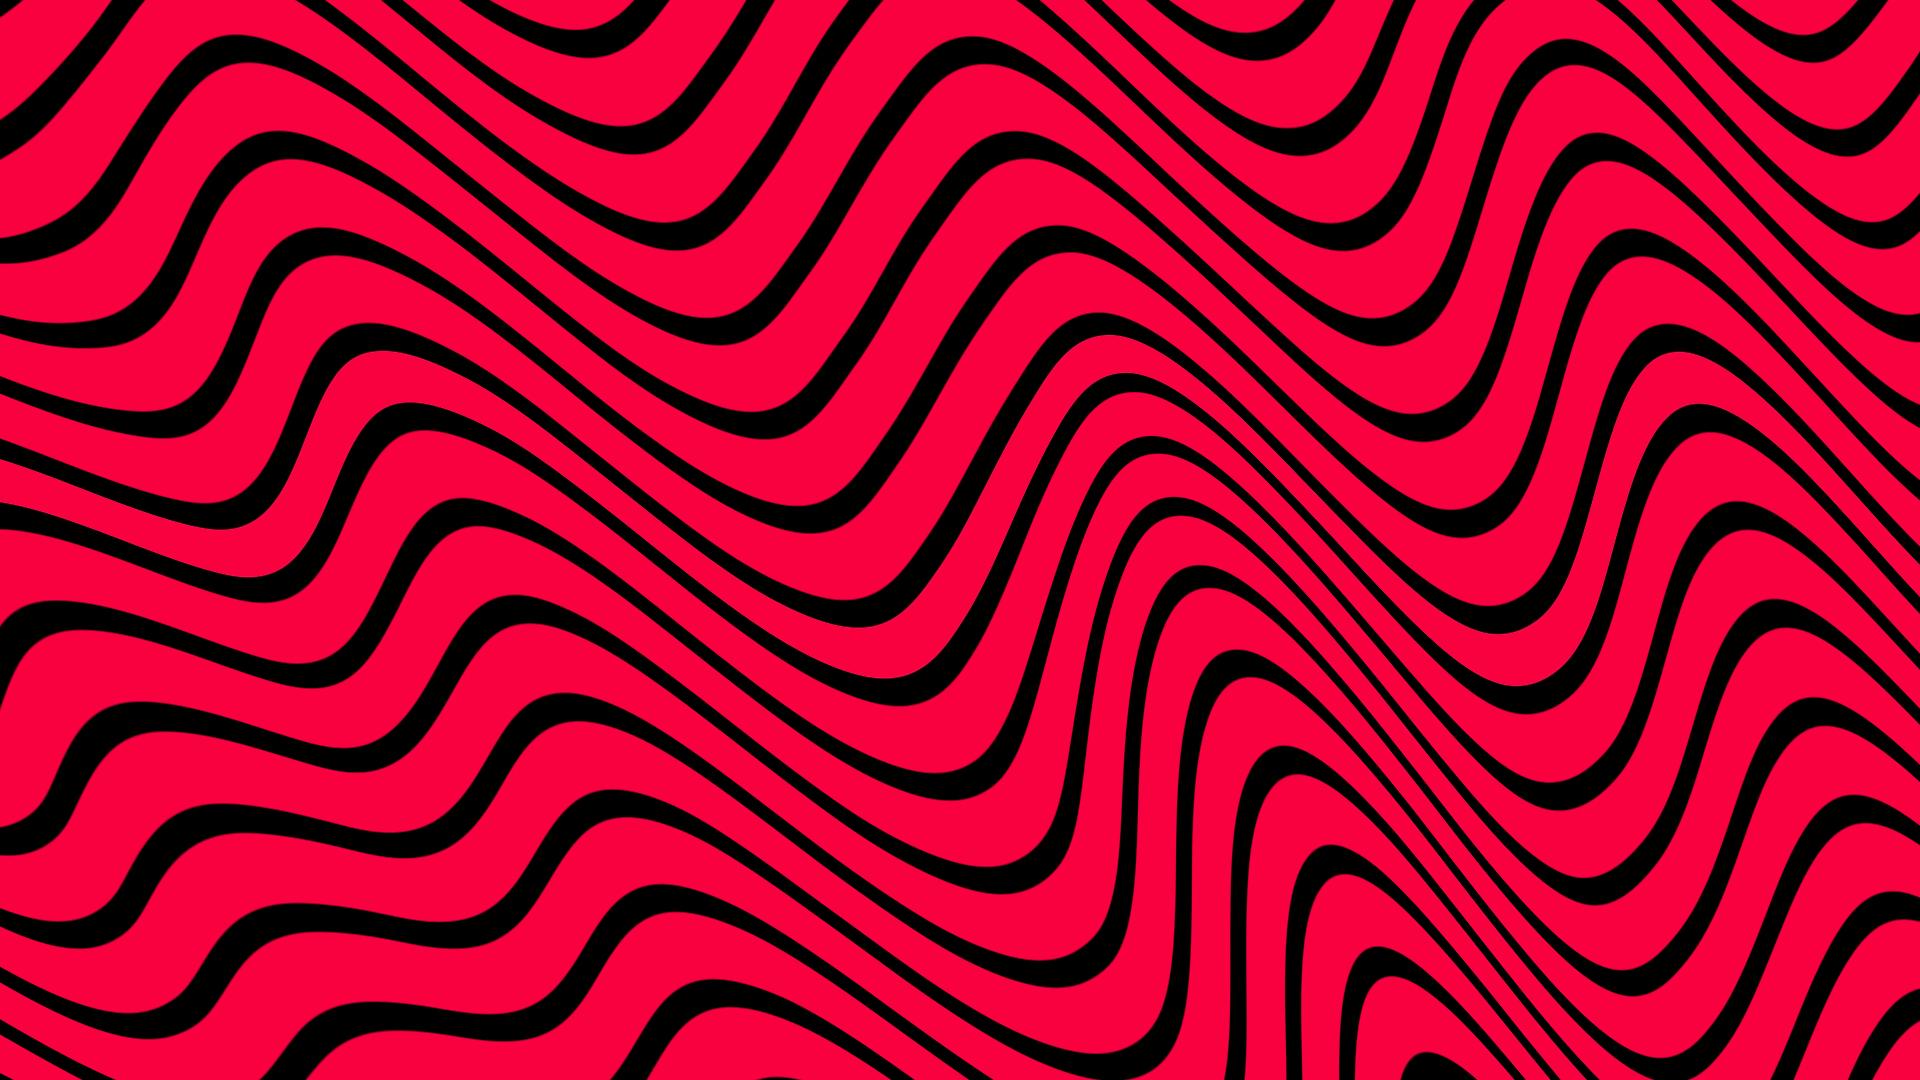 I Made This Pewdiepie S Wavy Background You Can Use It To Your